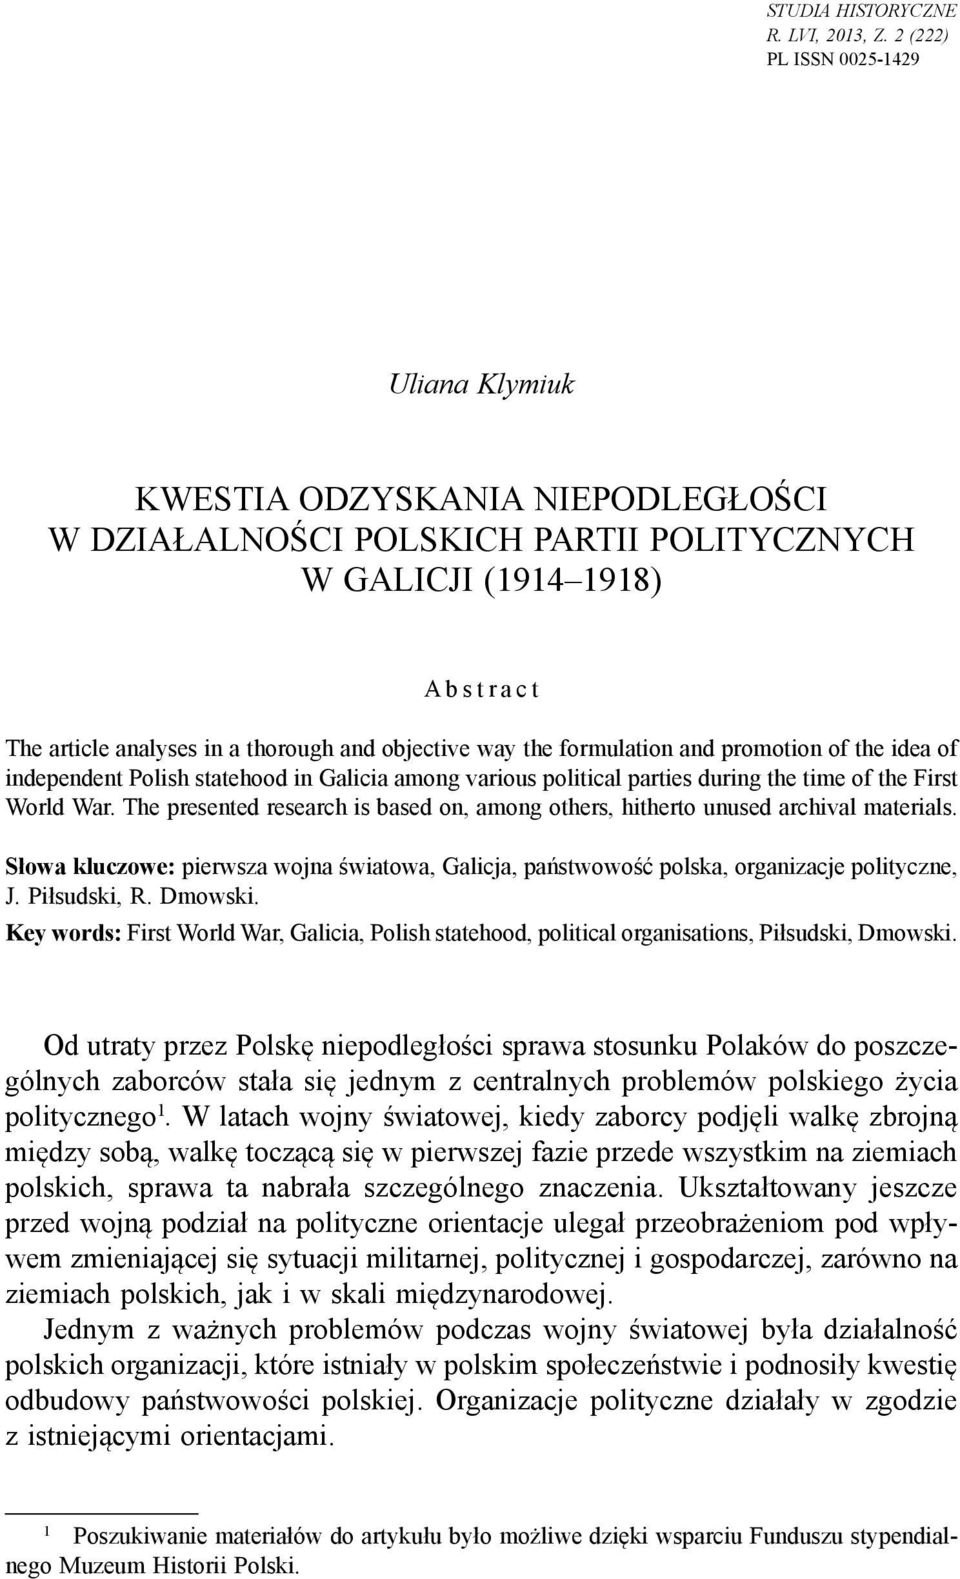 way the formulation and promotion of the idea of independent Polish statehood in Galicia among various political parties during the time of the First World War.